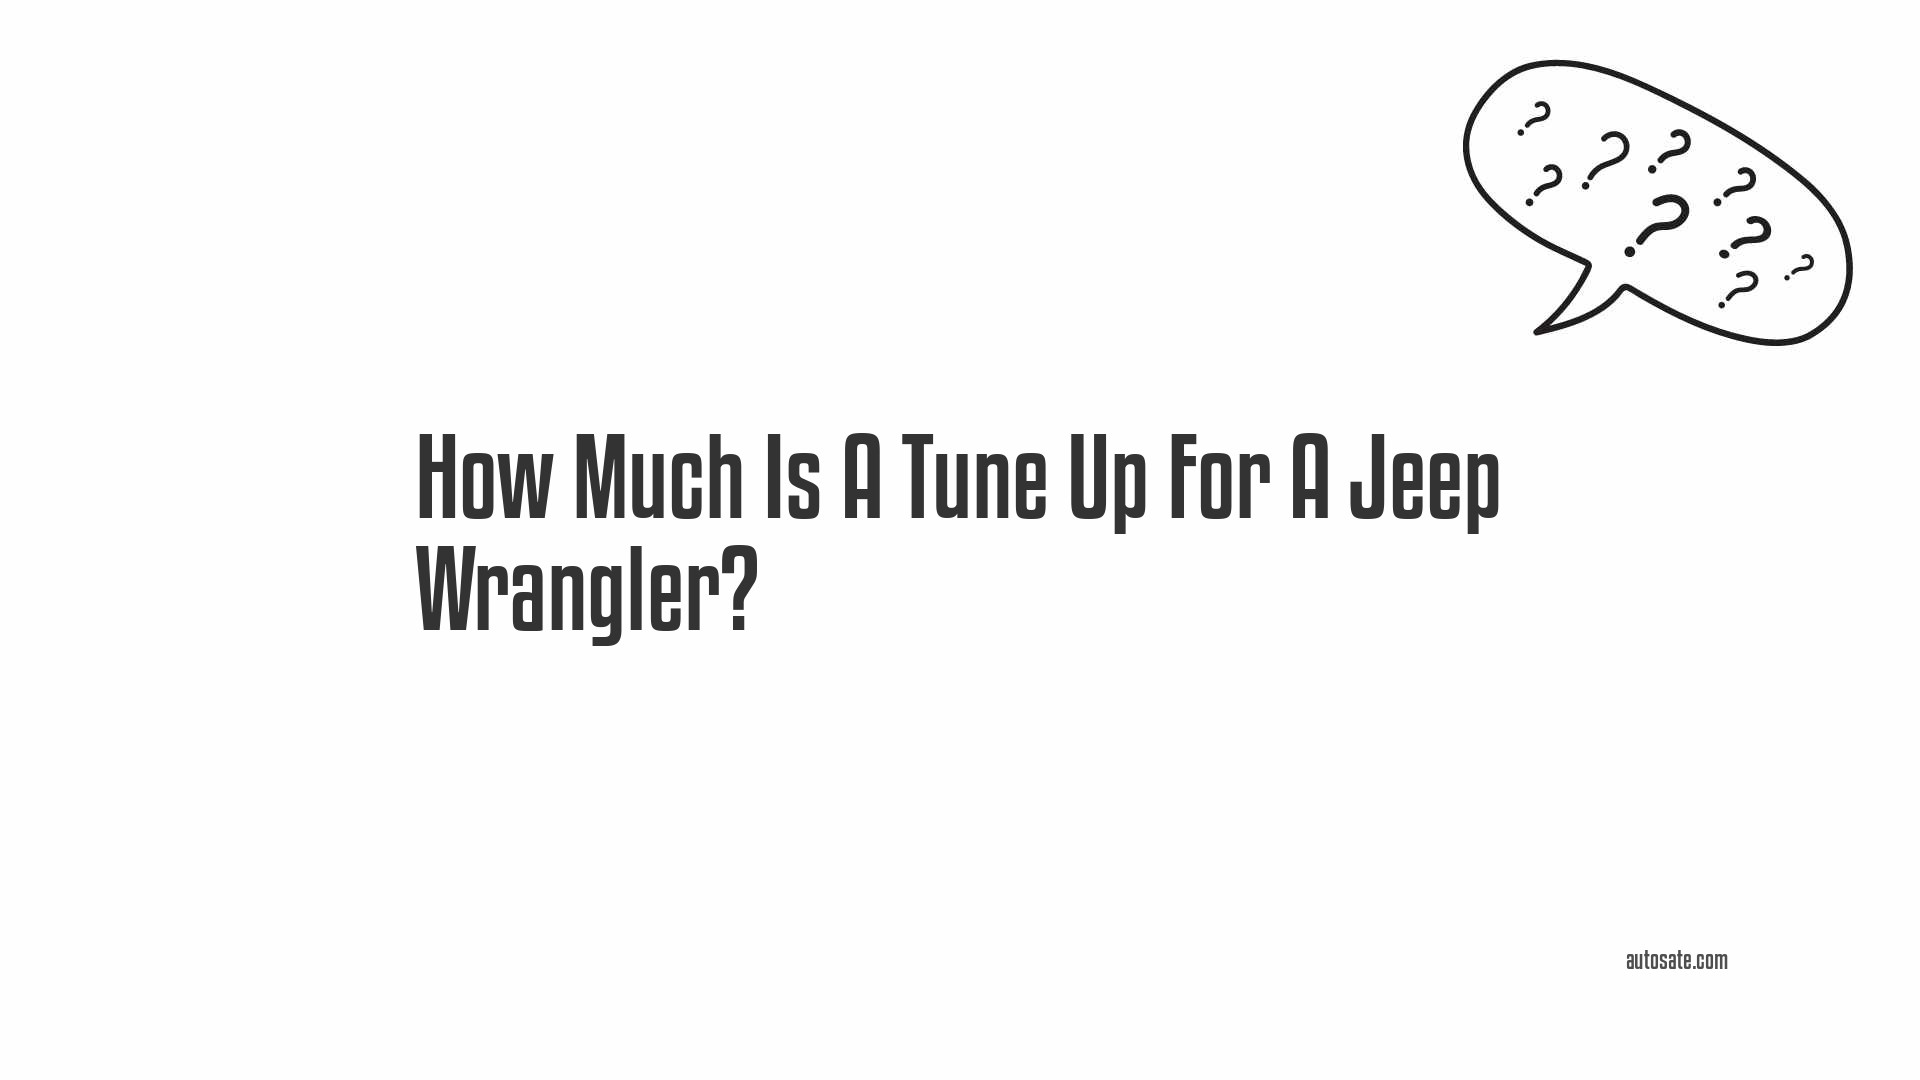 How Much Is A Tune Up For A Jeep Wrangler?